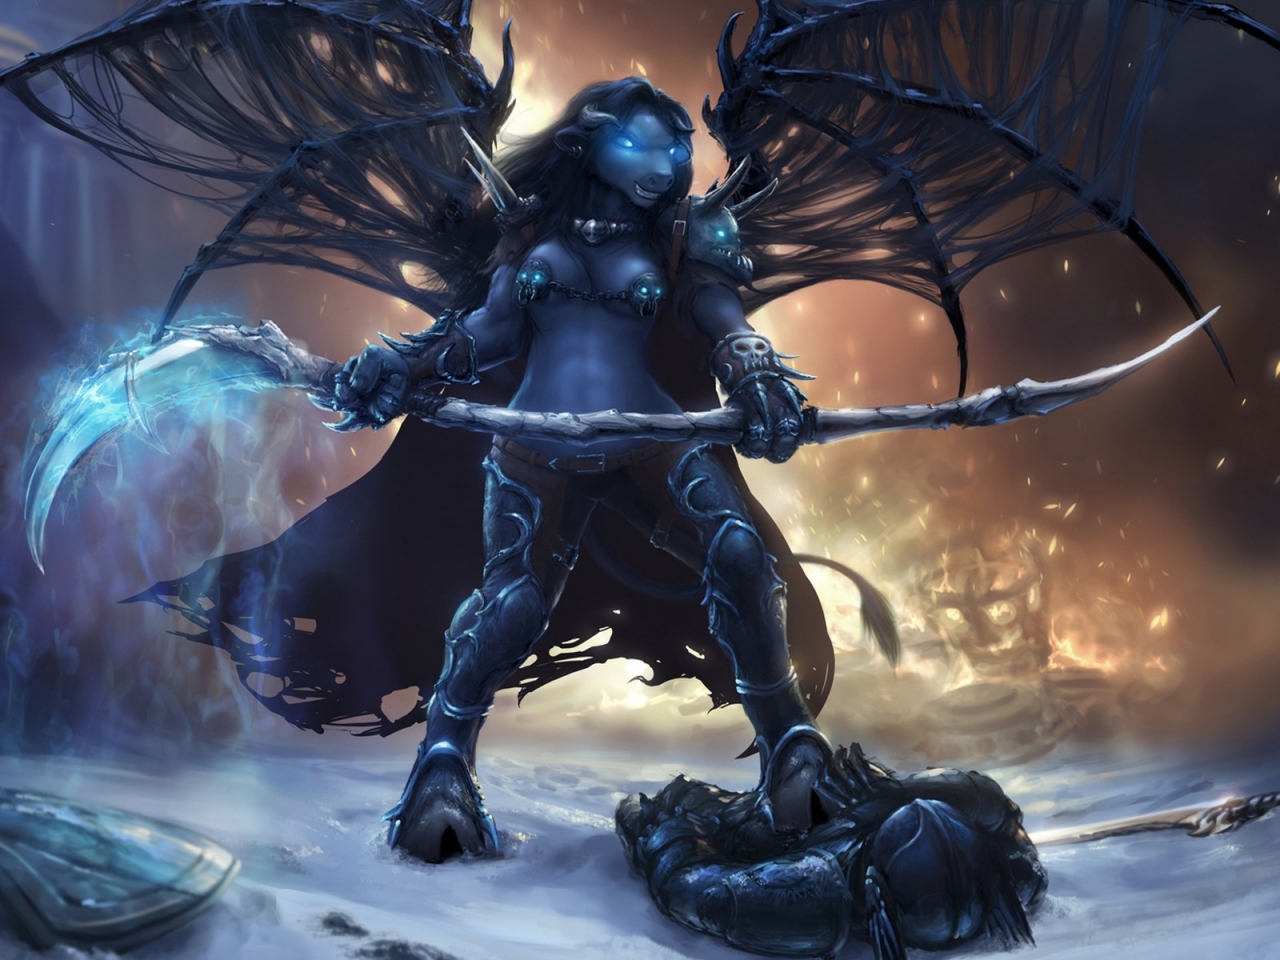 Death Knight World of Warcraft for 1280 x 960 resolution